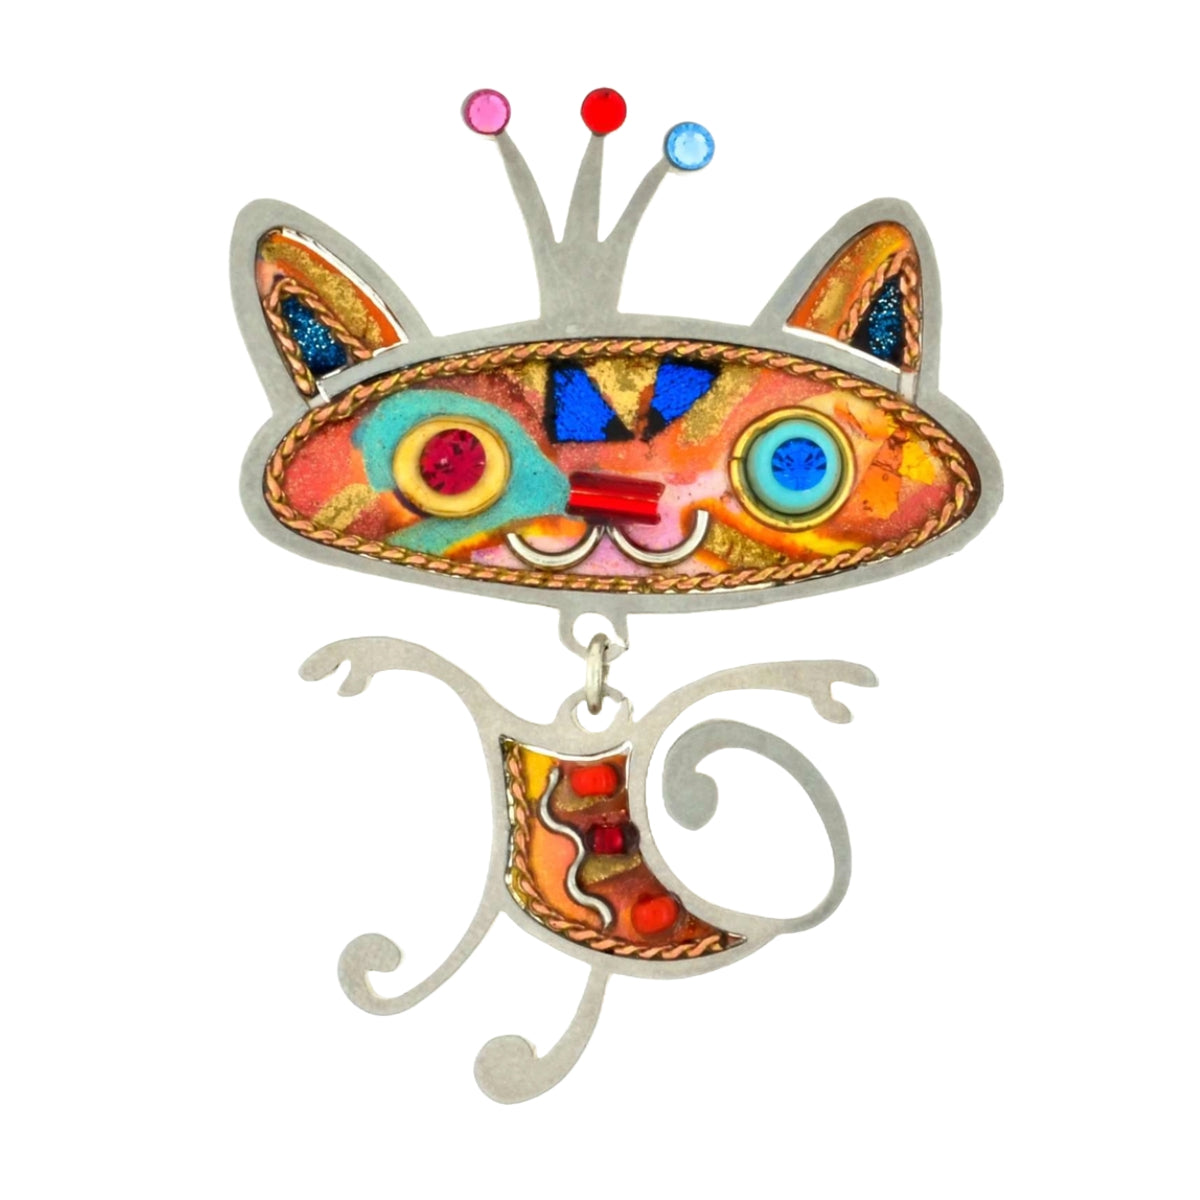 Playful Kitty Cat Brooch with a Crown